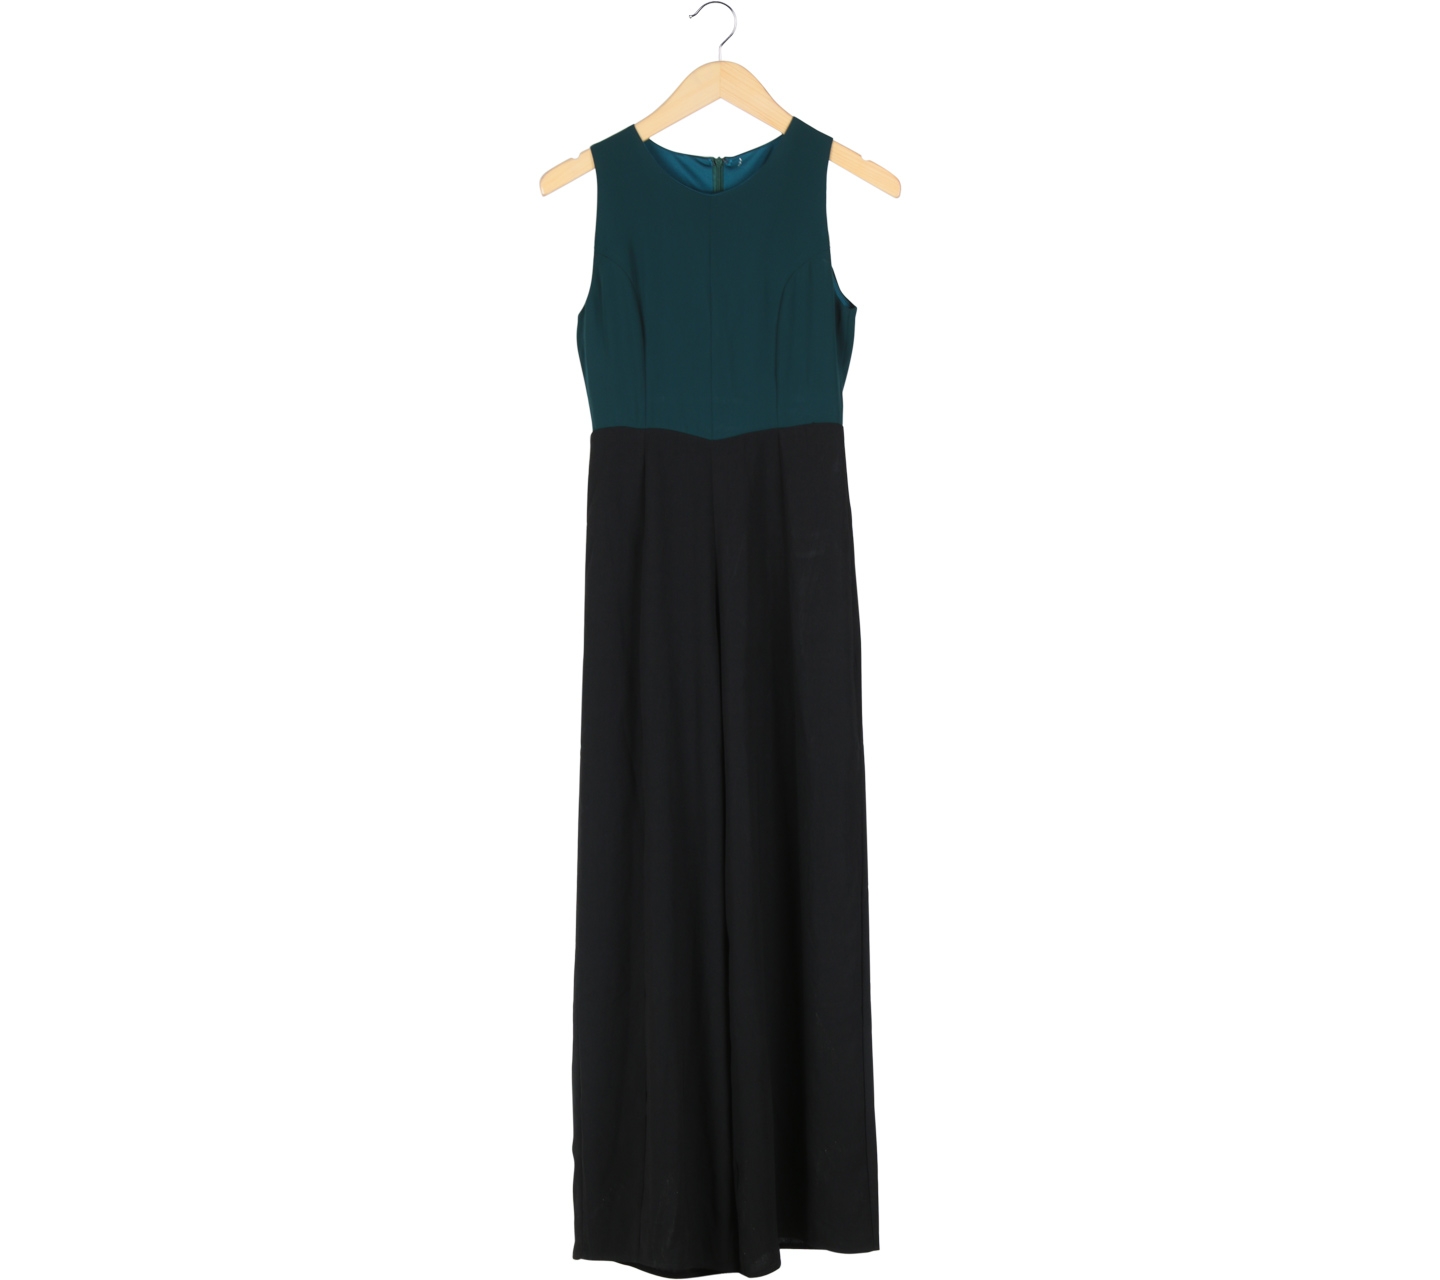 Green And Black Sleeveless Jumpsuit